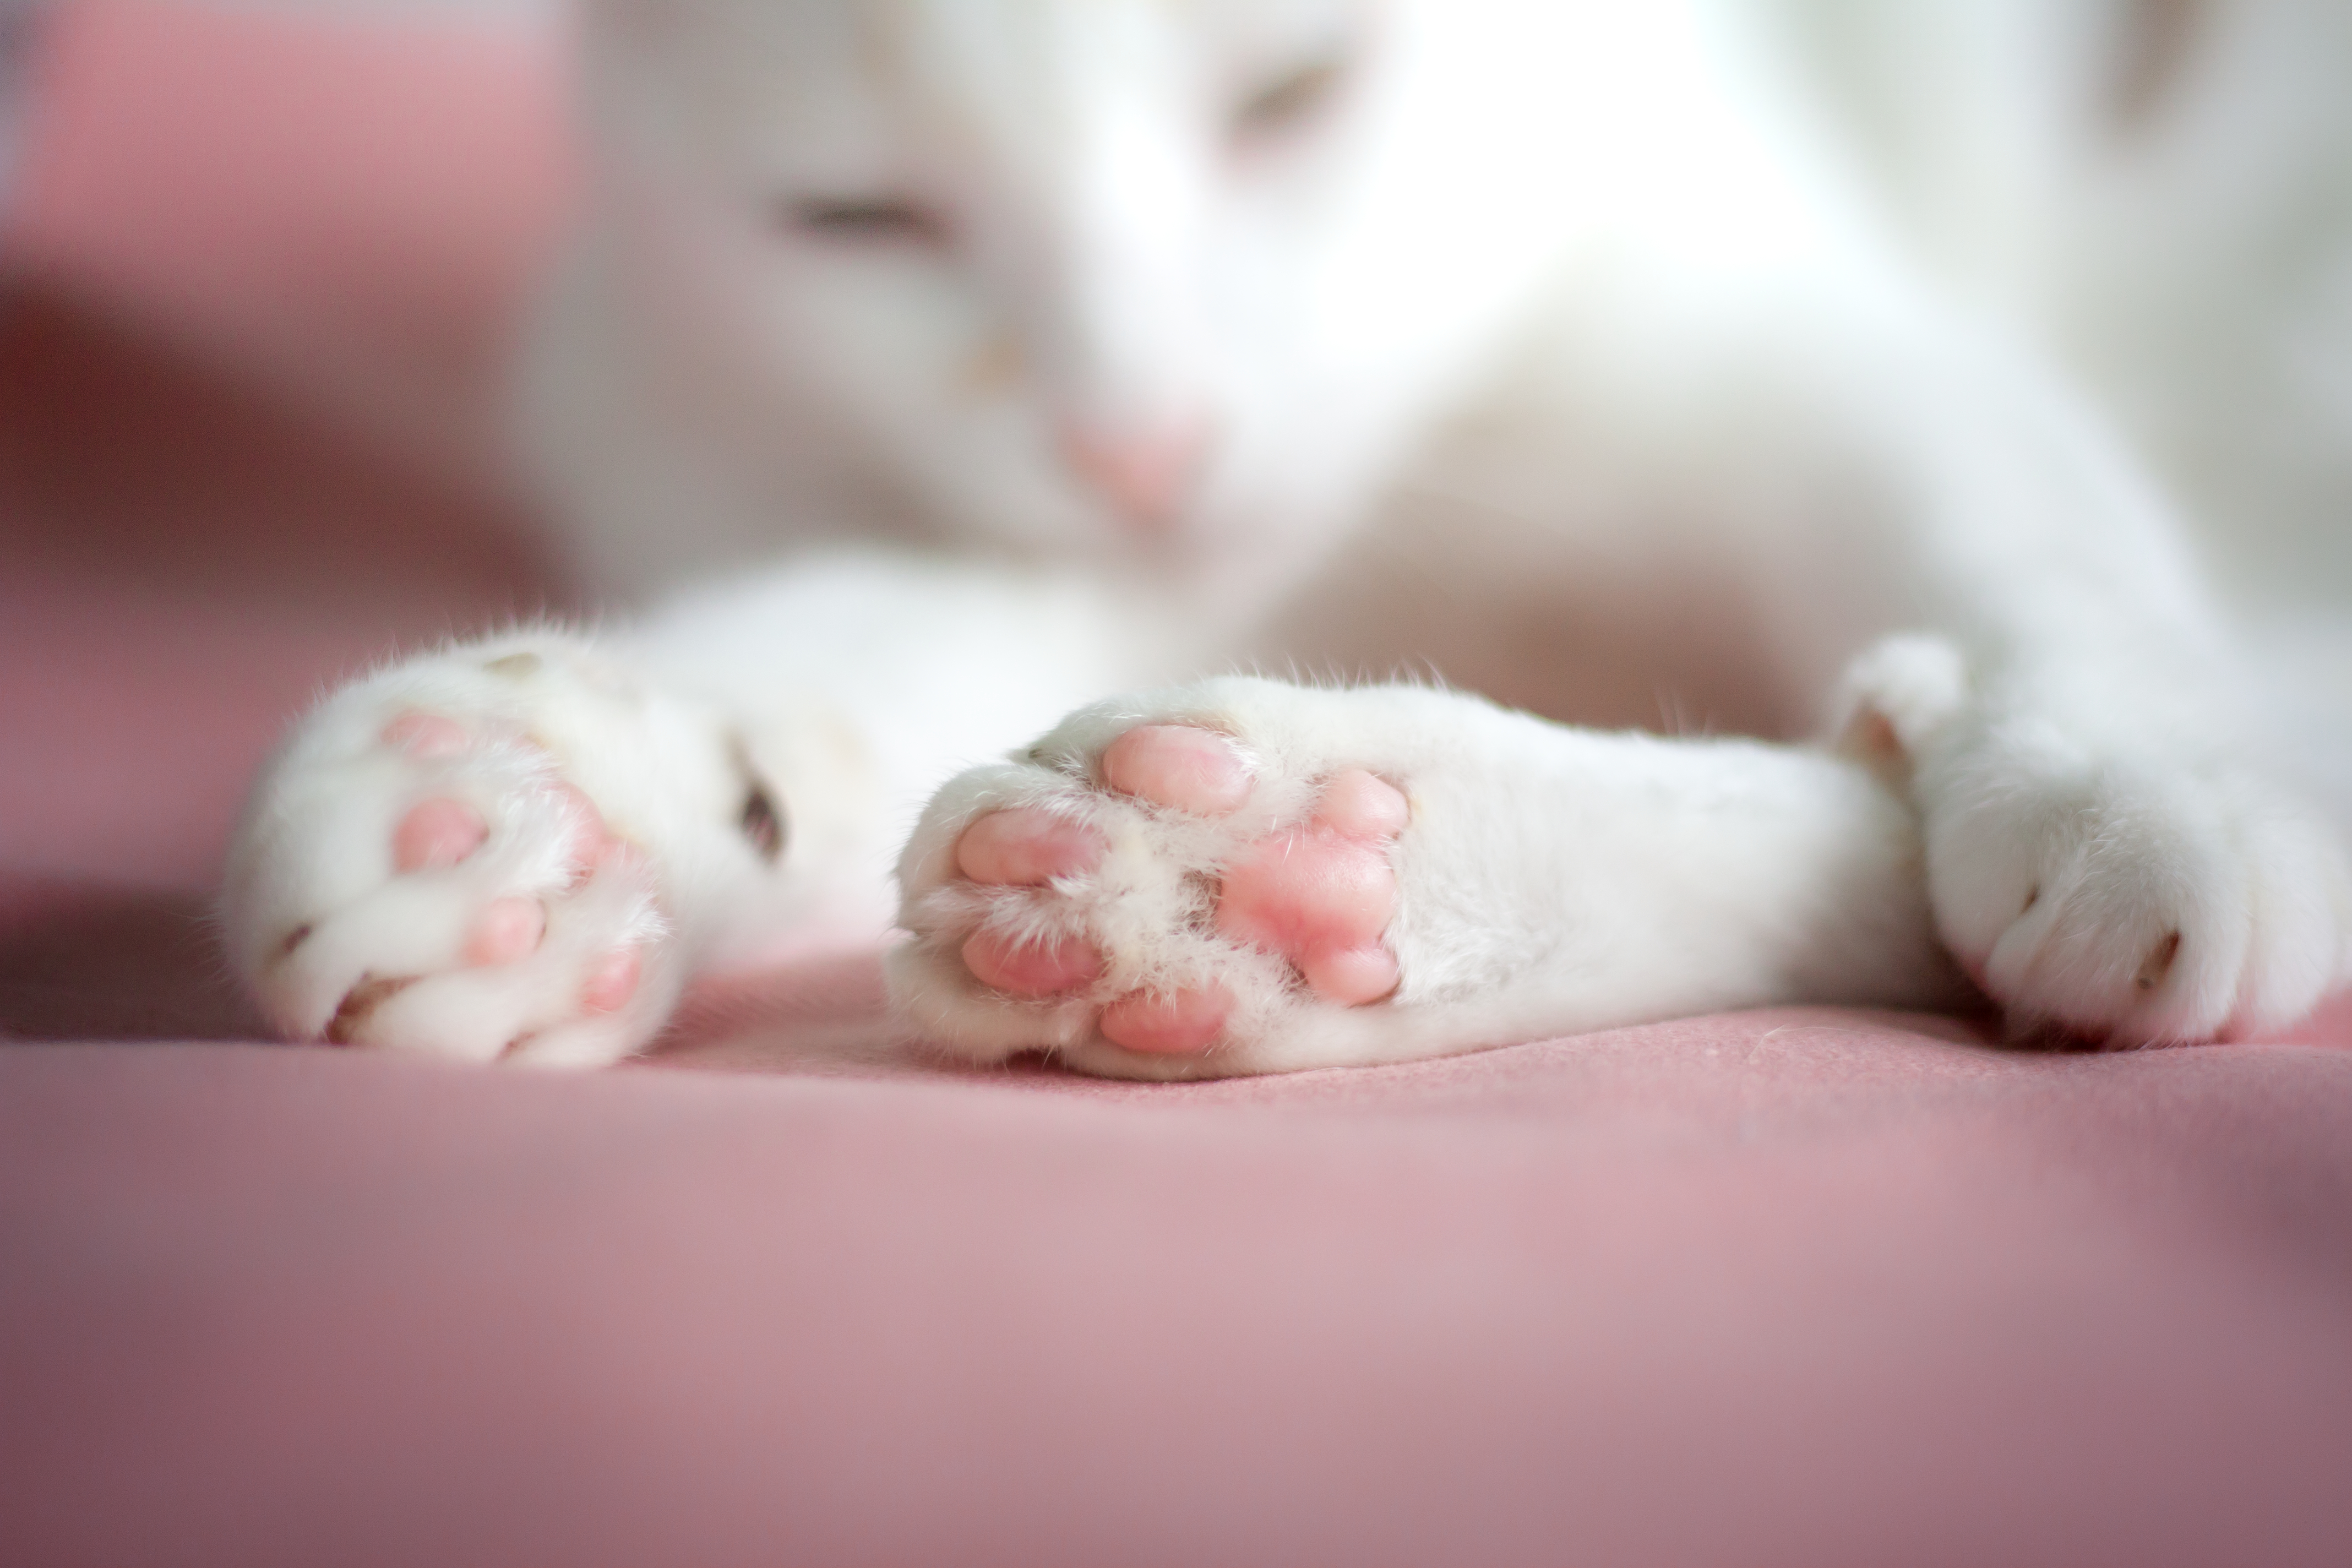 A close up of a white cat's paws